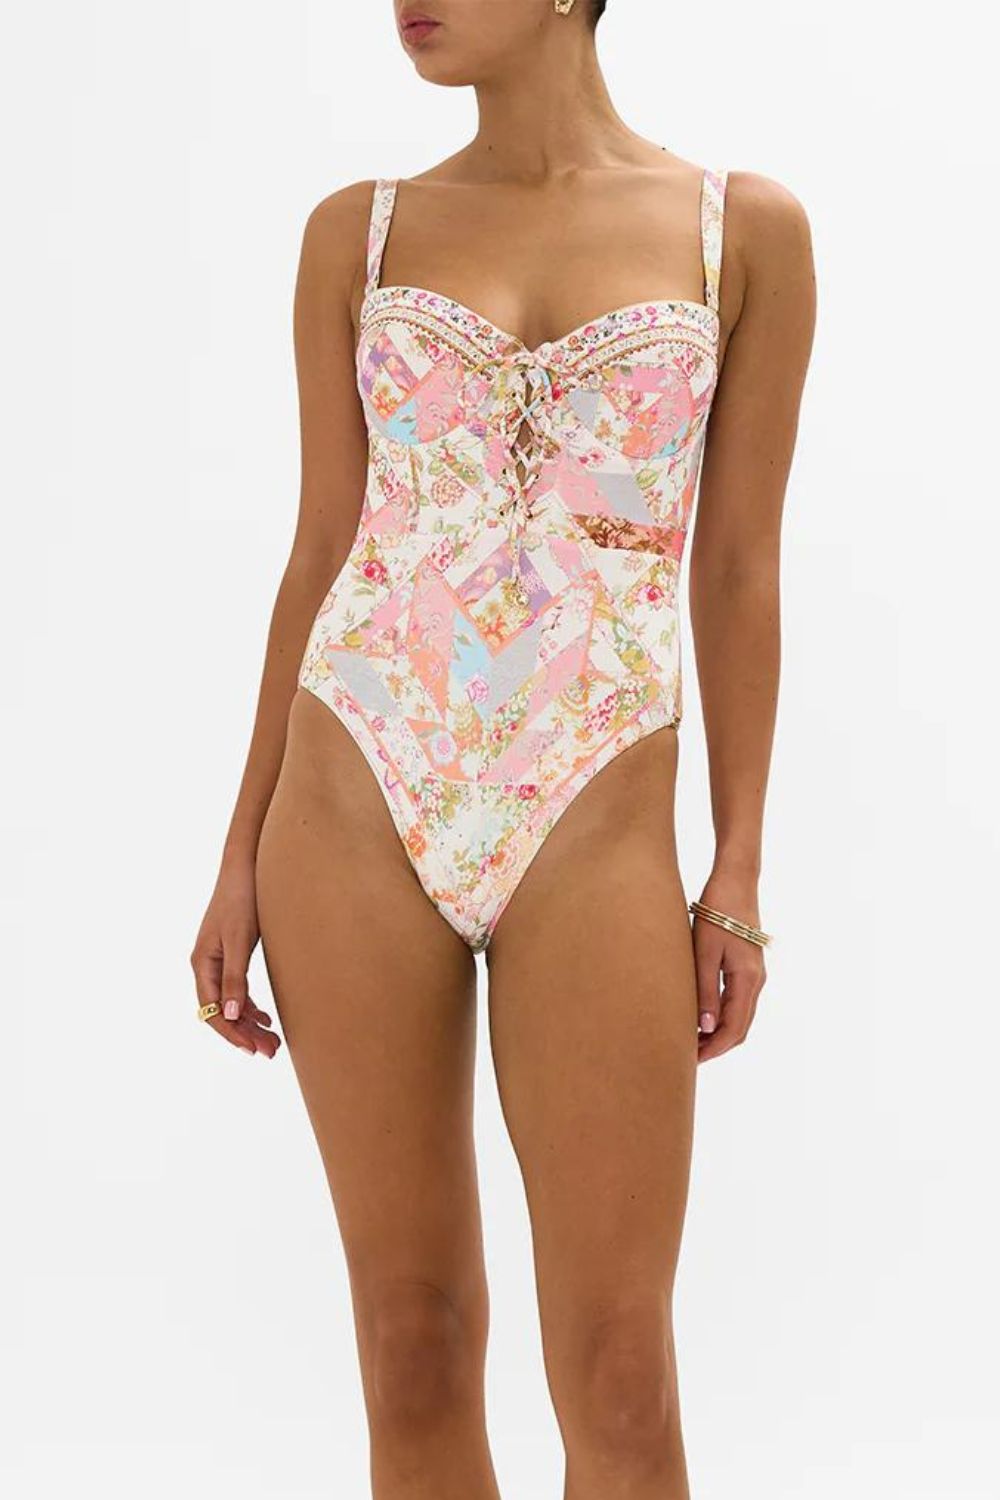 Lace-Up Balconette Underwire One-Piece in Sew Yesterday